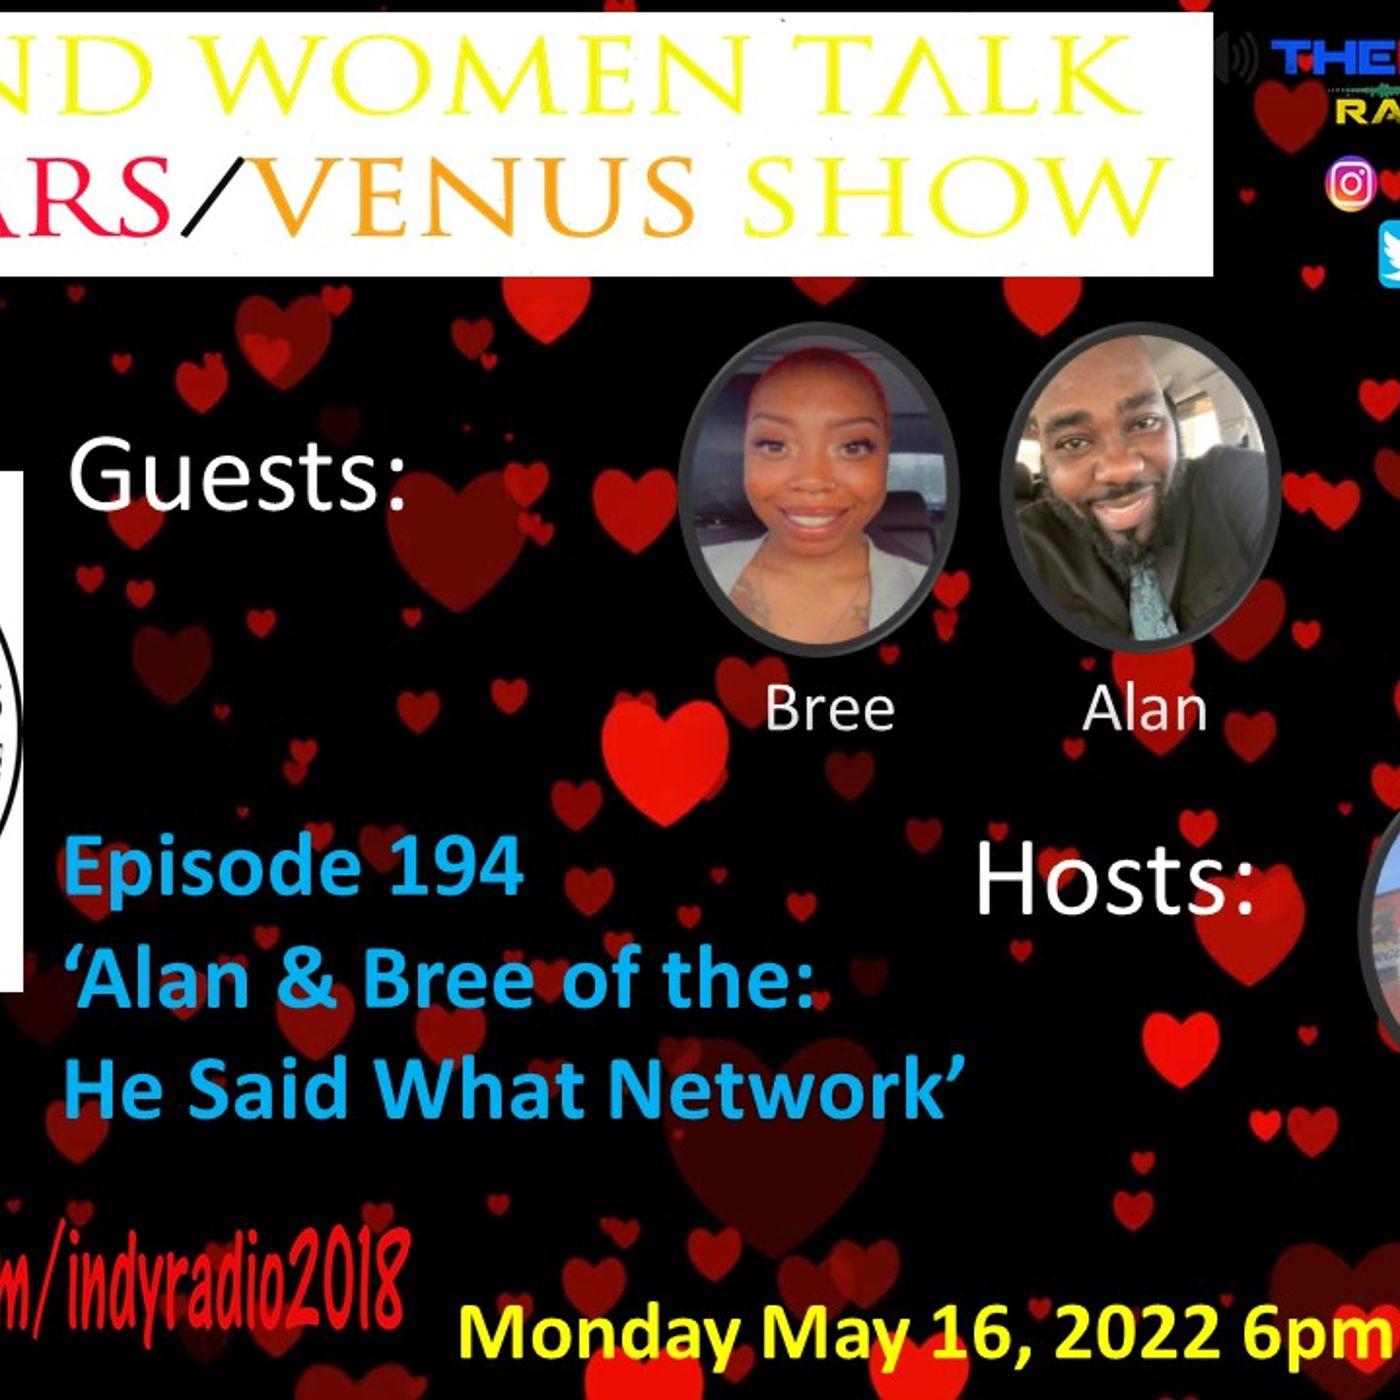 Mars/Venus: 194 - Alan and Bree of the He Said What Network